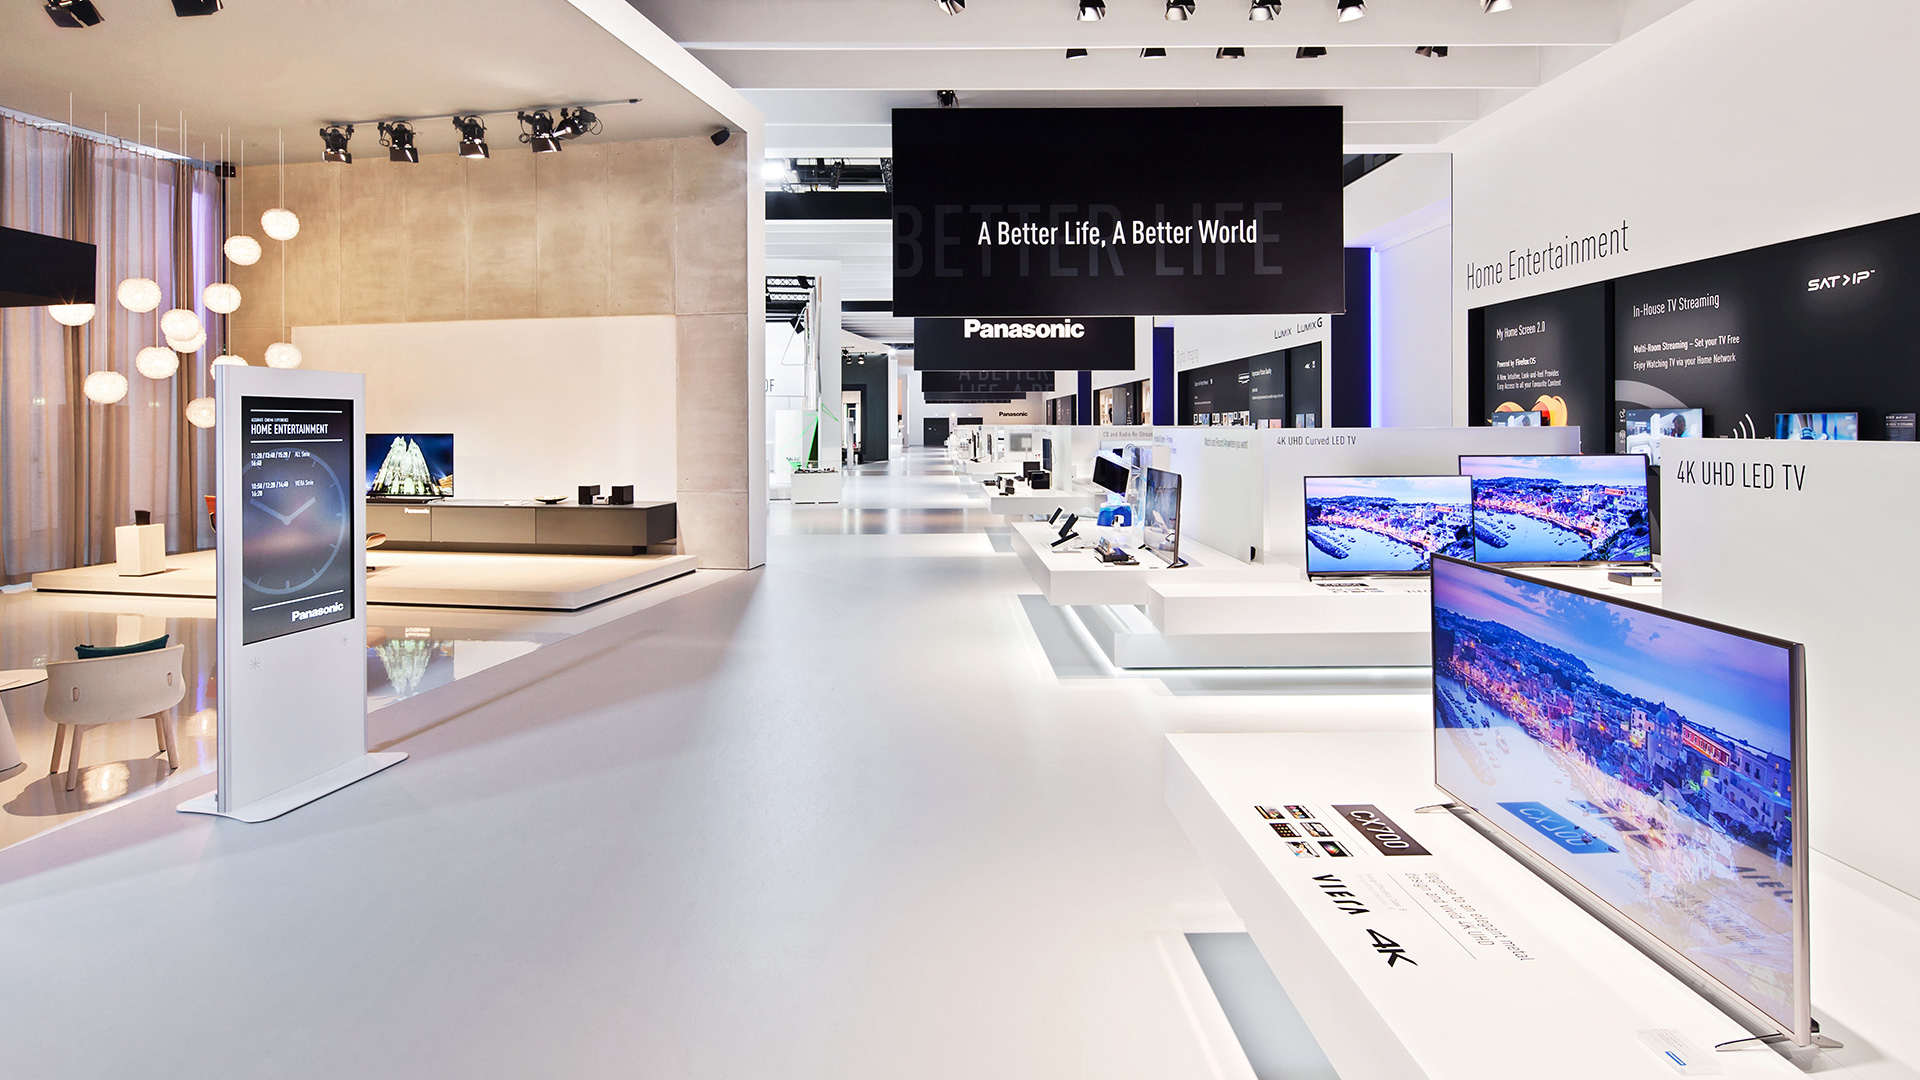 Dart stages the Panasonic fair stand at the IFA 2015